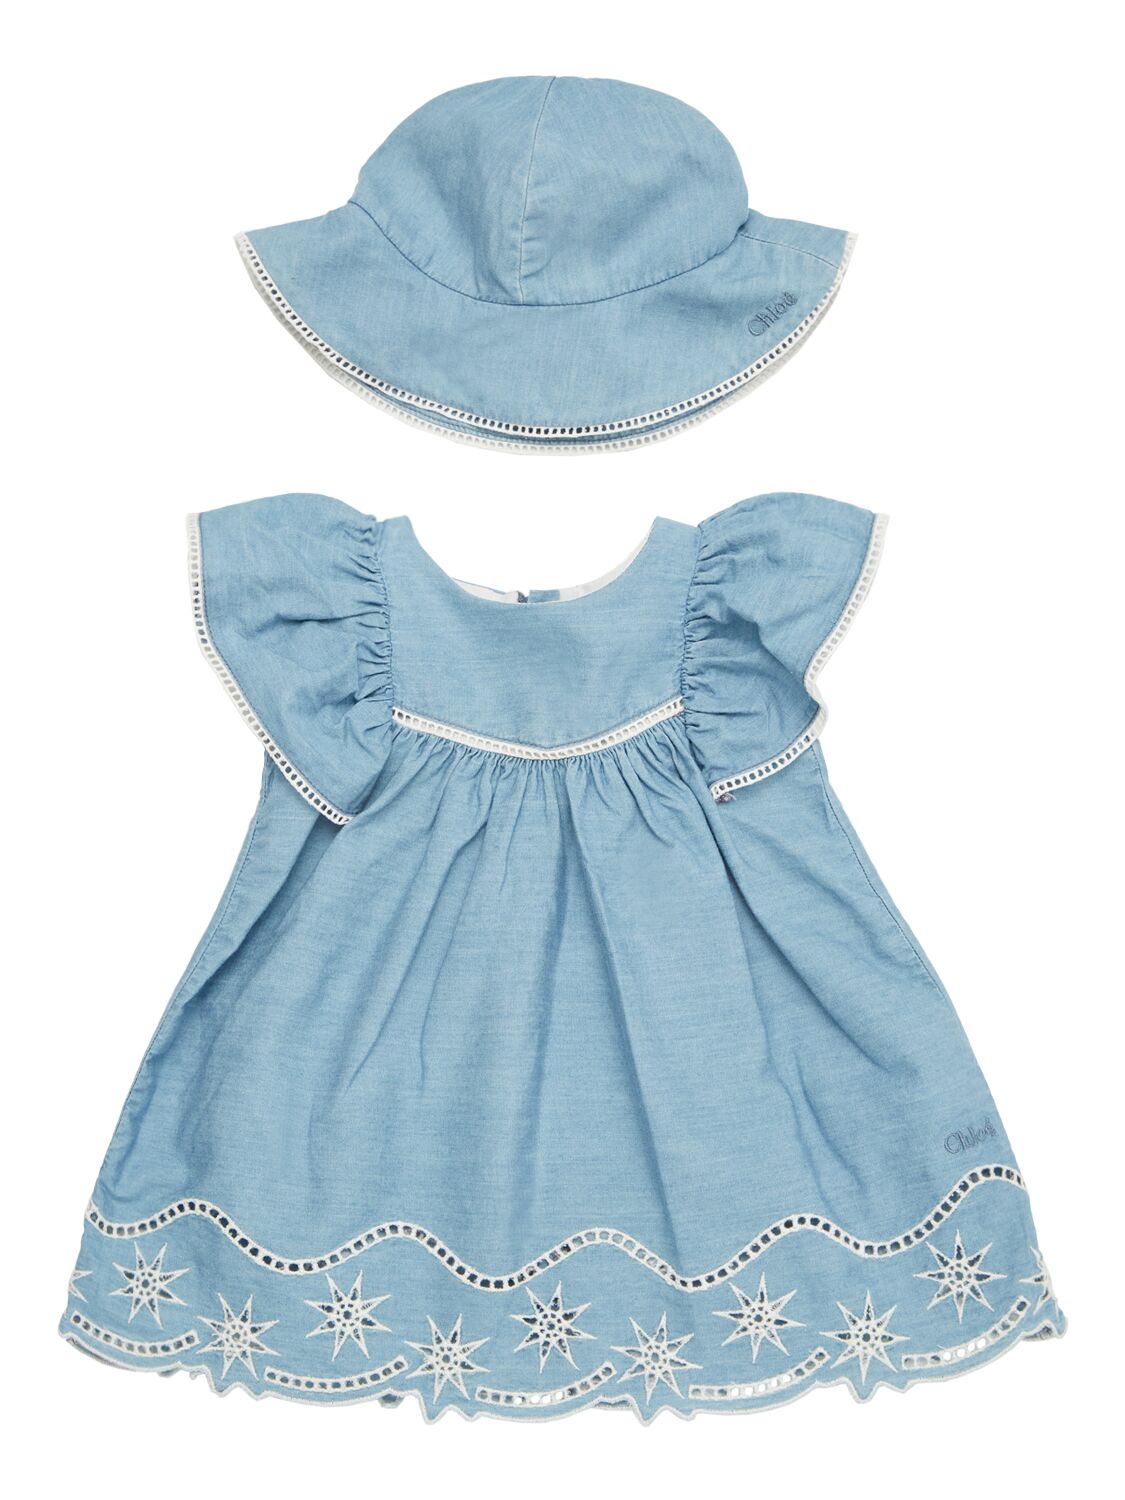 Chloé Babies' Cotton Chambray Dress & Hat In Light Blue